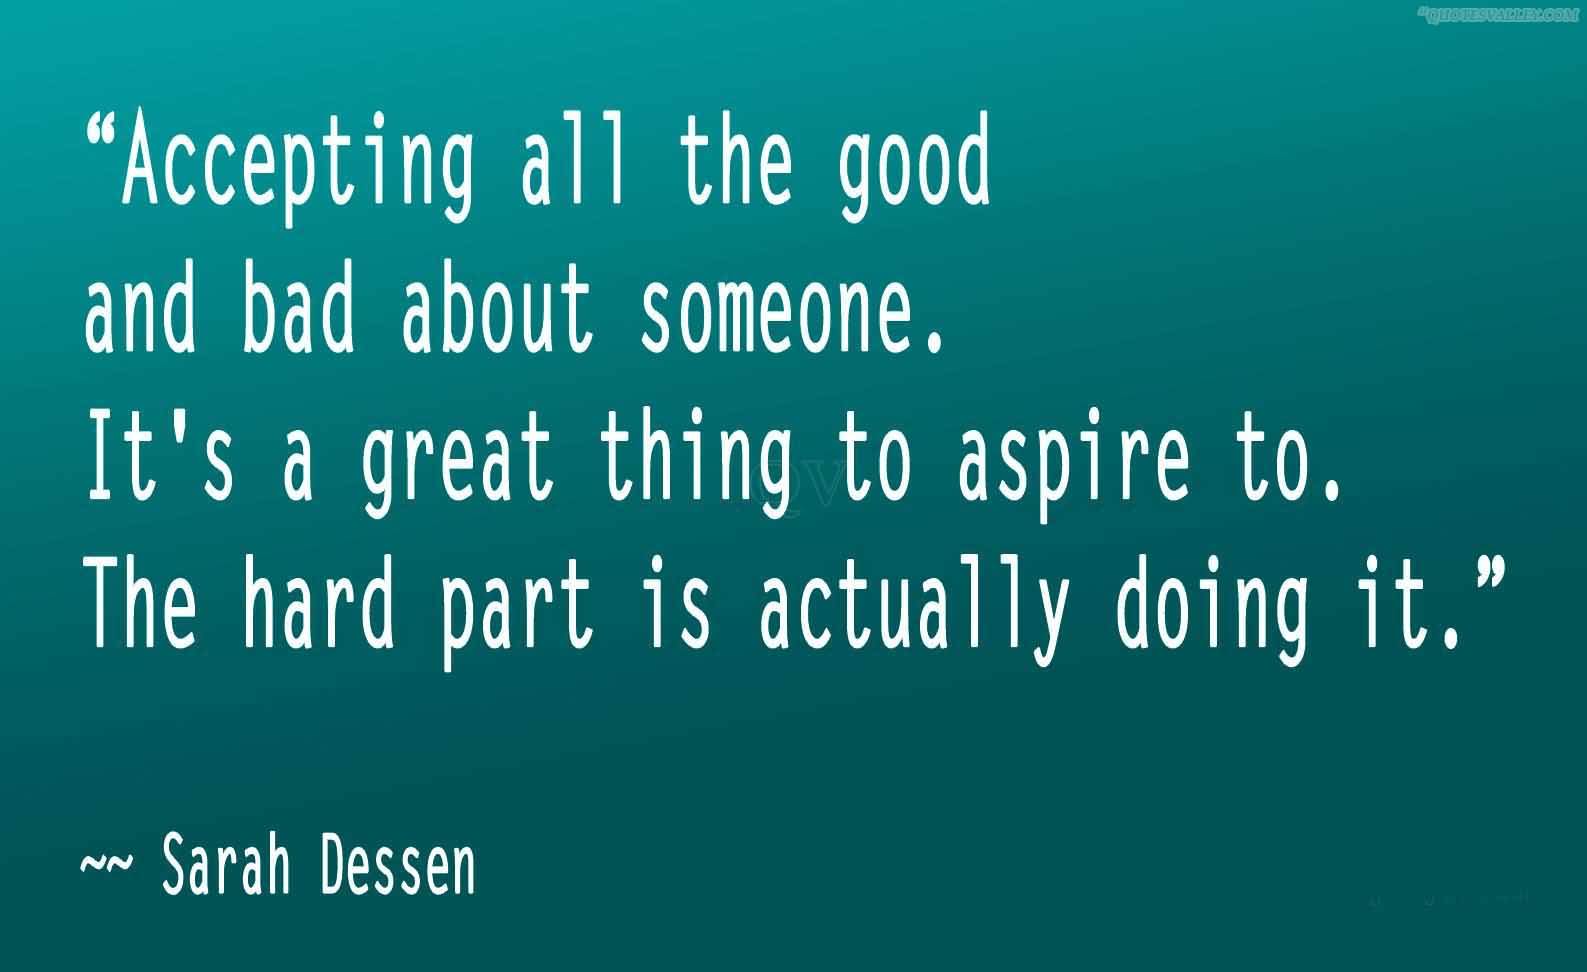 Accepting all the good and bad about someone. It’s a great thing to aspire to. The hard part is actually doing it. Sarah Dessen